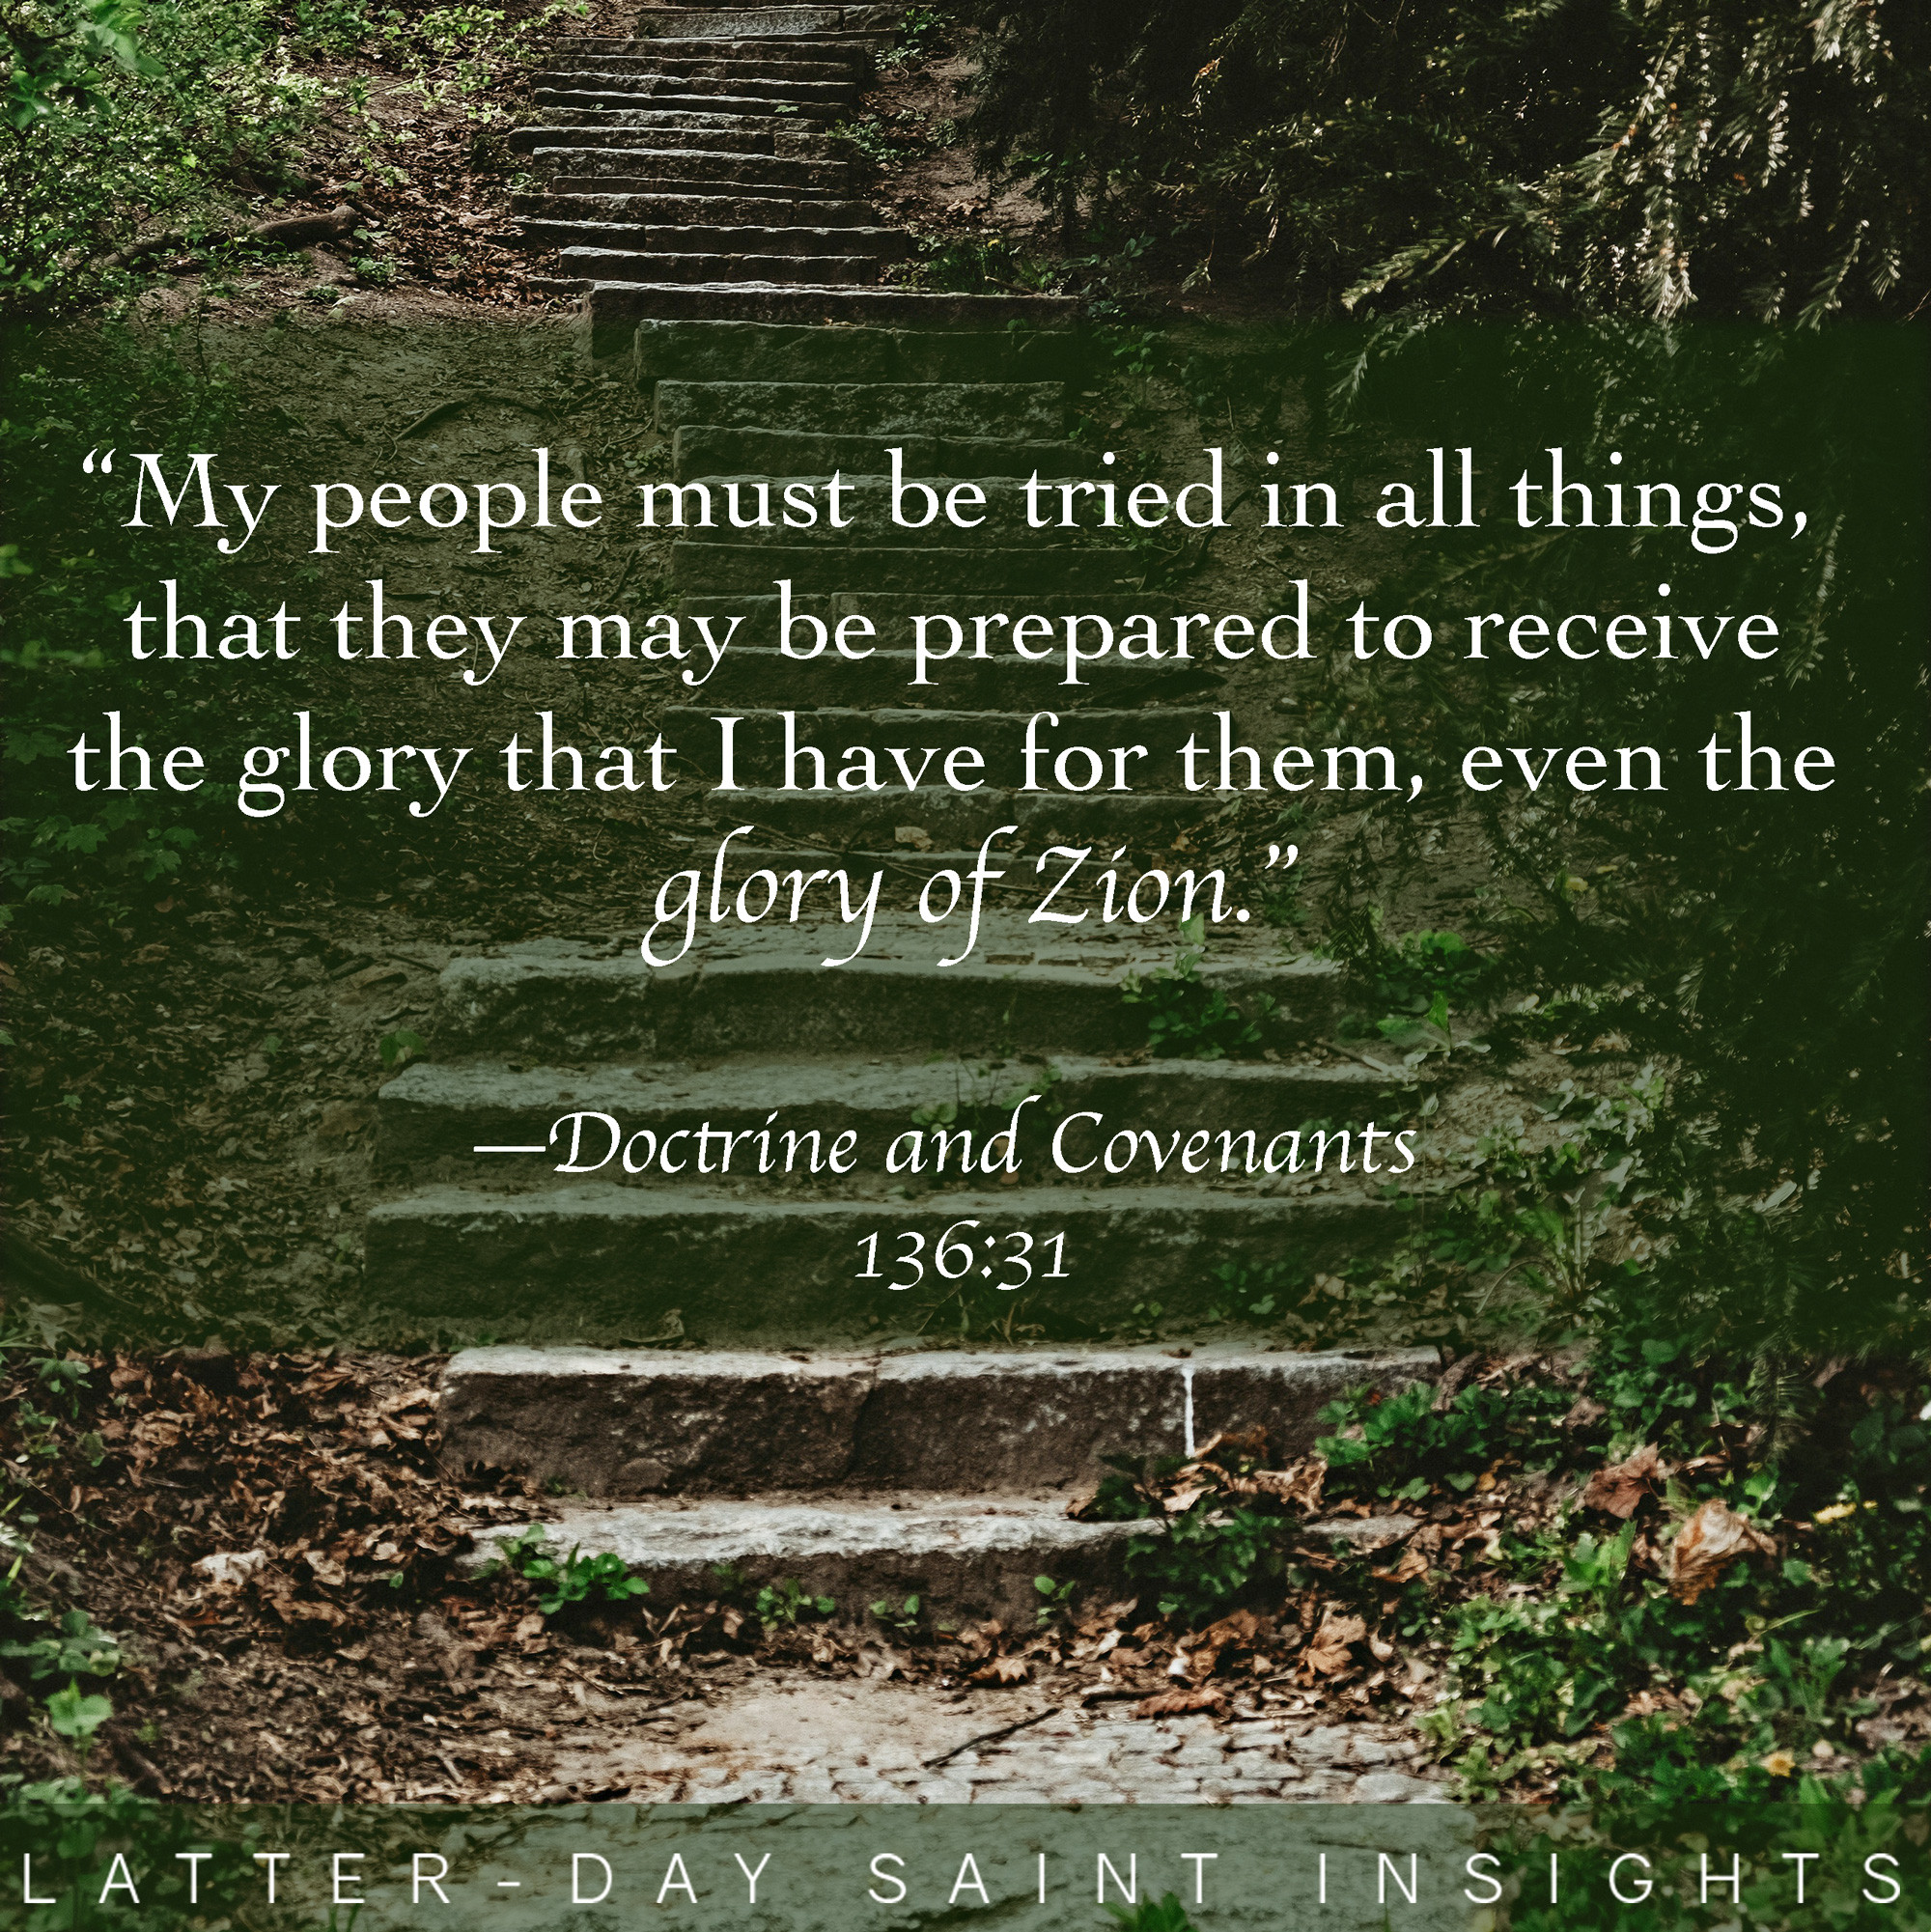 "My people must be tried in all things, that they may be prepared to receive the glory that I have for them, even the glory of Zion."—Doctrine and Covenants 136:31